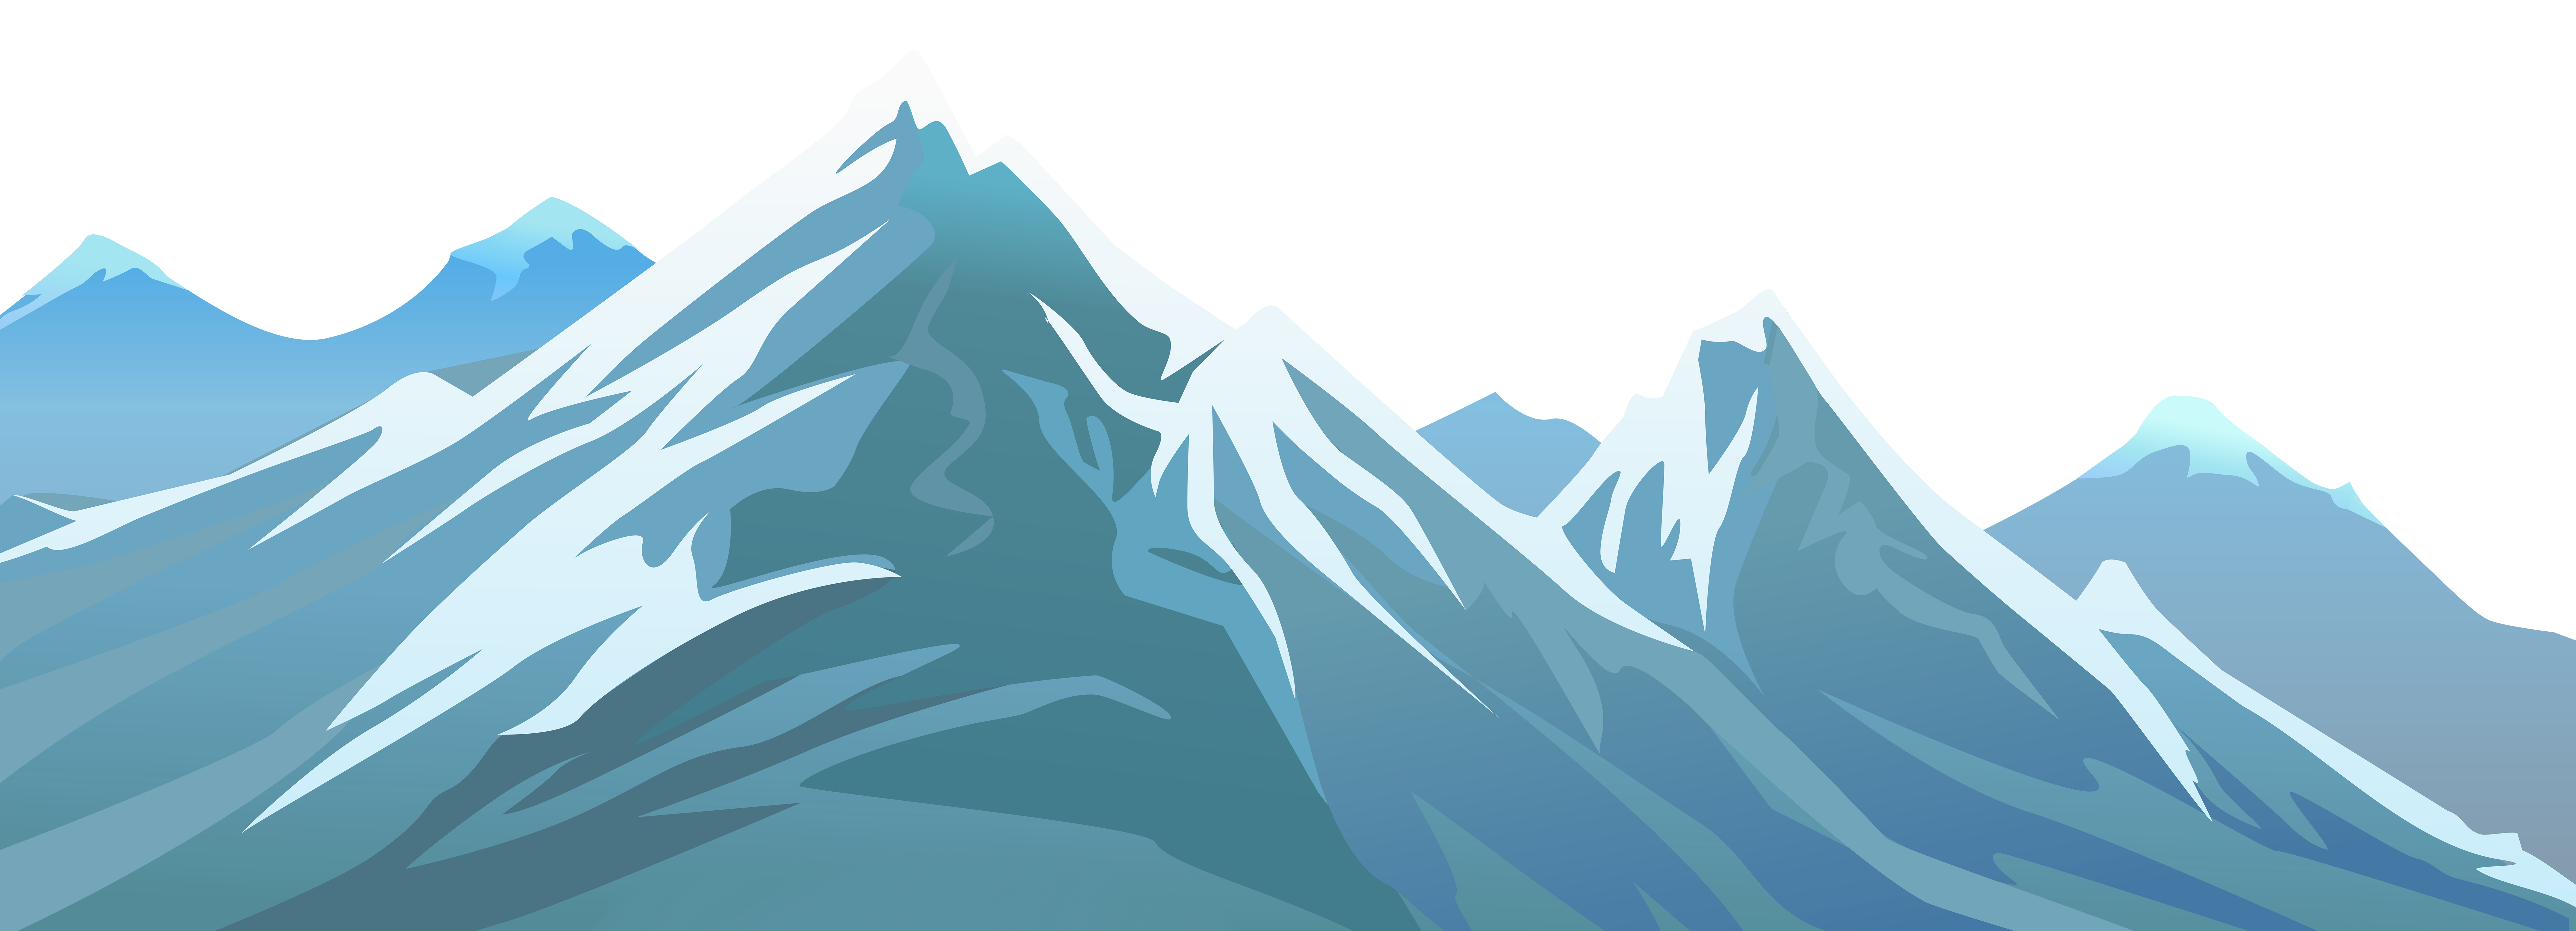 Snowy Mountain Transparent Png Clip Art Image Gallery Yopriceville High Quality Images And Transparent Png Free Clipart